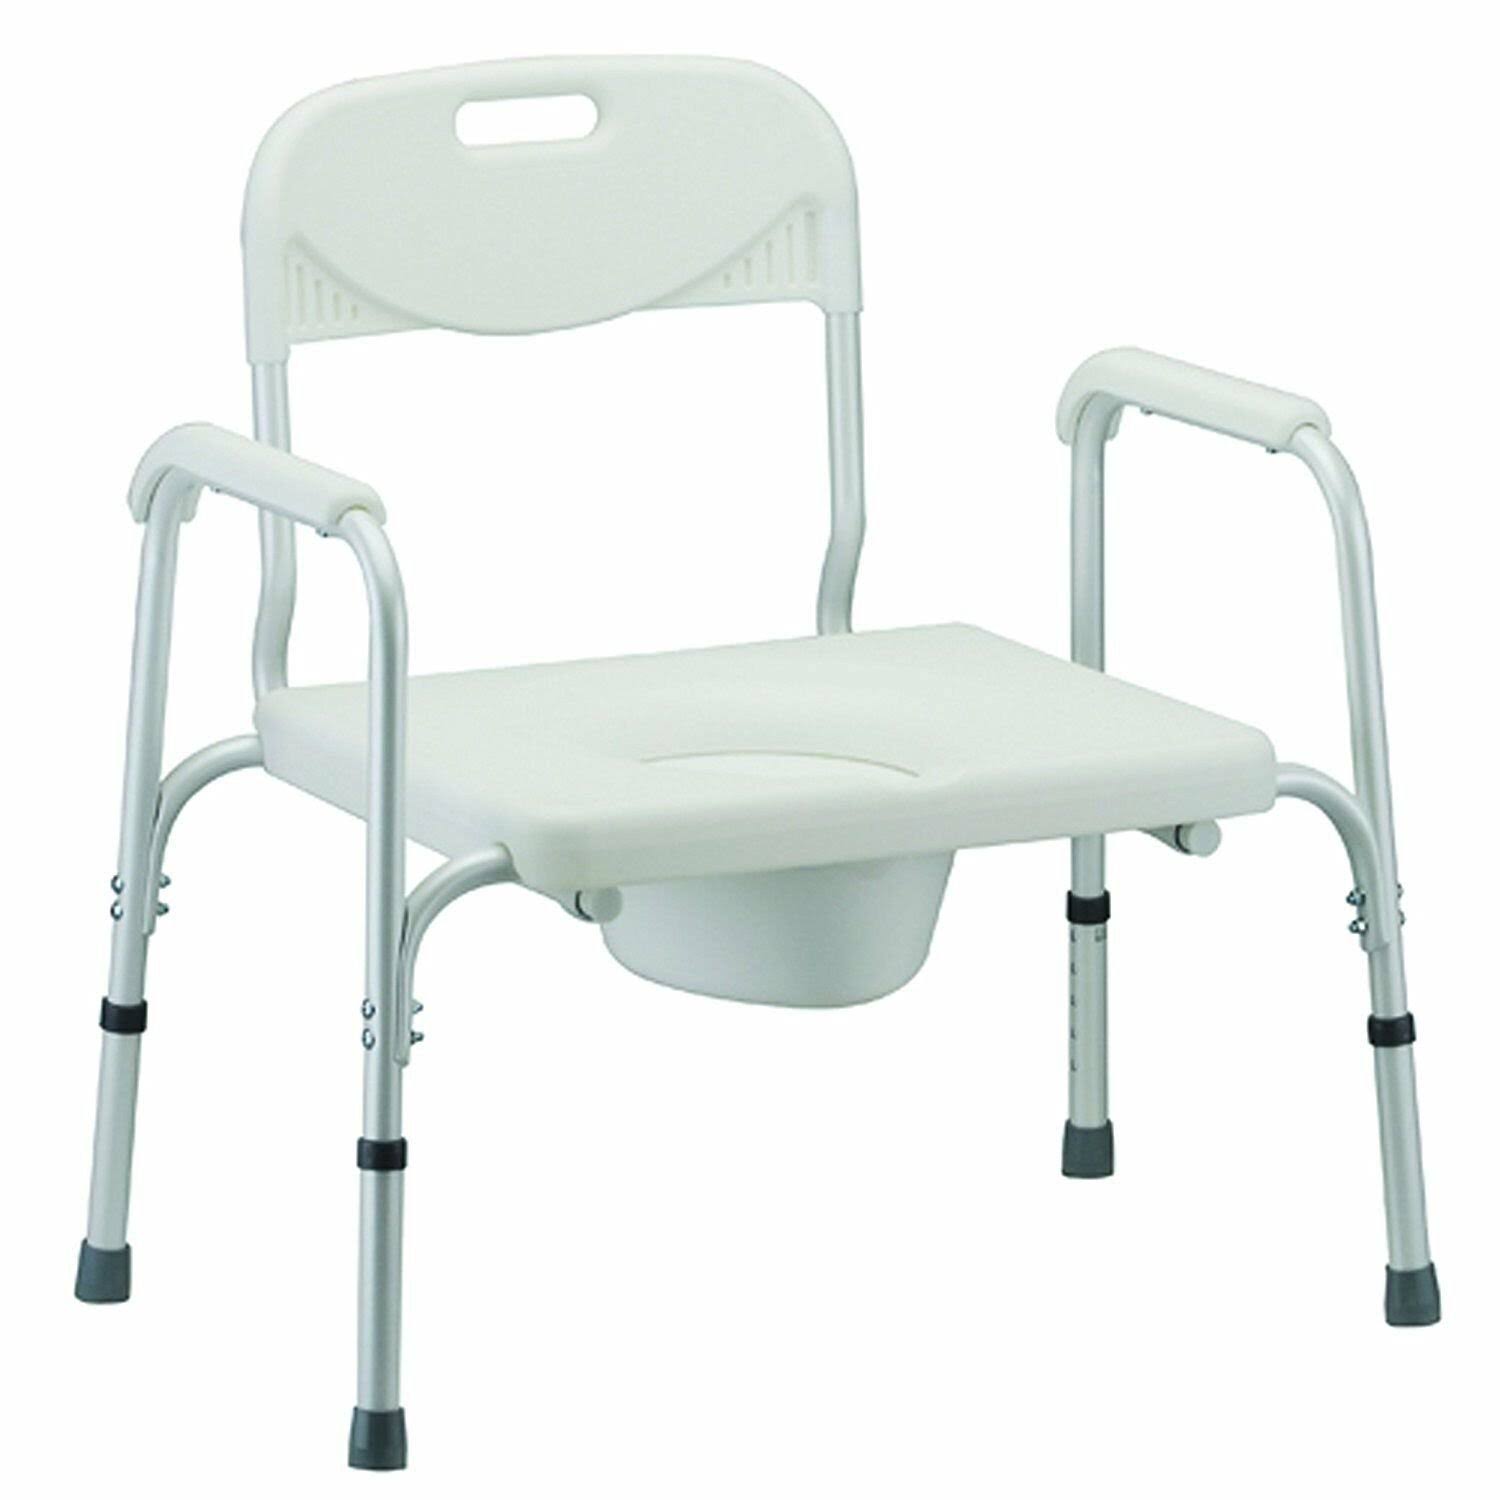 Nova Medical Products Heavy Duty Commode - with Back and Wide Seat, White, 24lbs